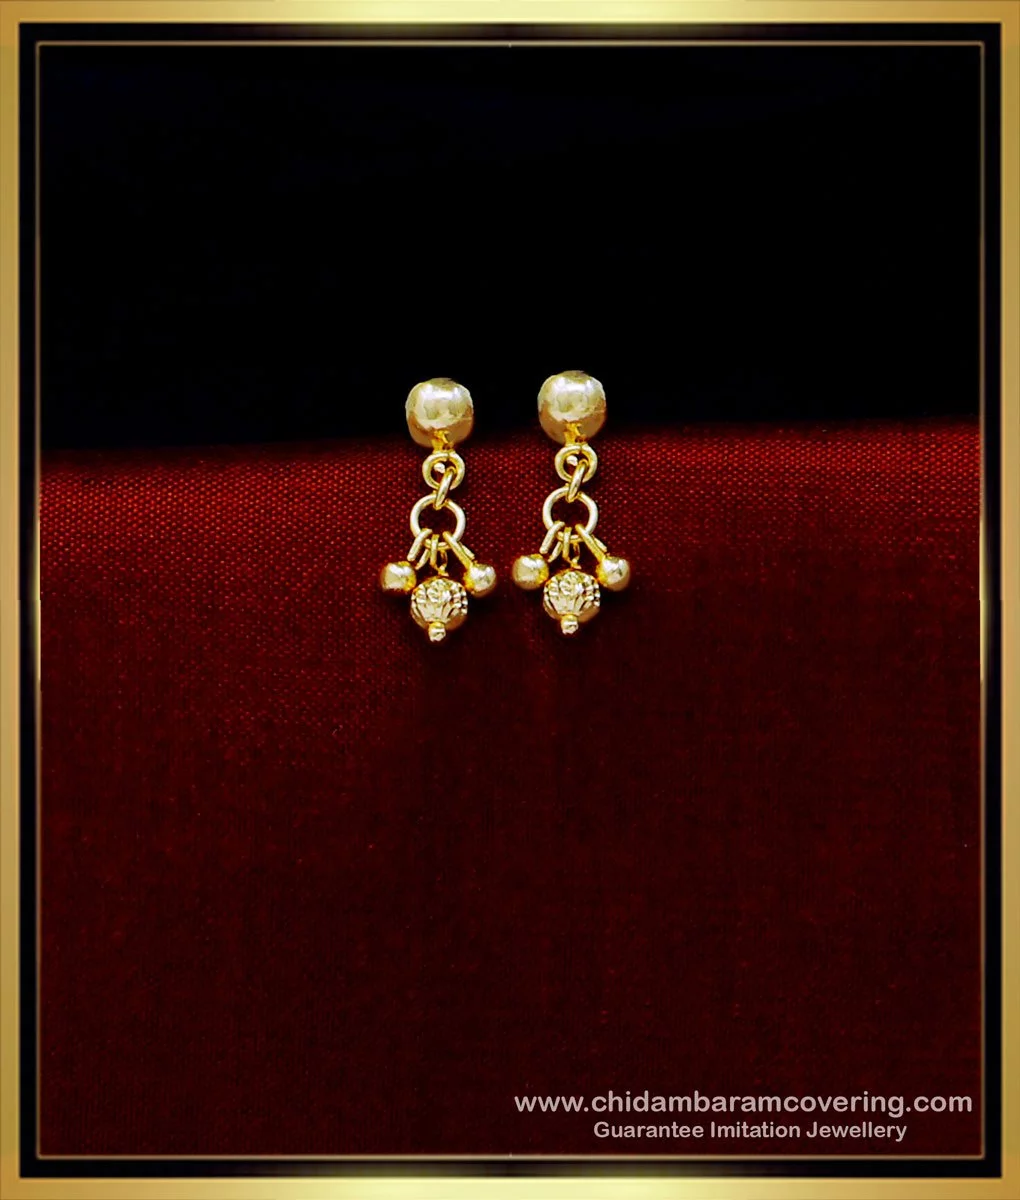 Lovely 18K Solid Gold GF Heart Drop Earrings For Women/Girls Trendy Fashion  Silpada Jewelry For Europe, Eastern Kids, And Children Perfect Gift From  Wwwabcdefg886, $2.11 | DHgate.Com